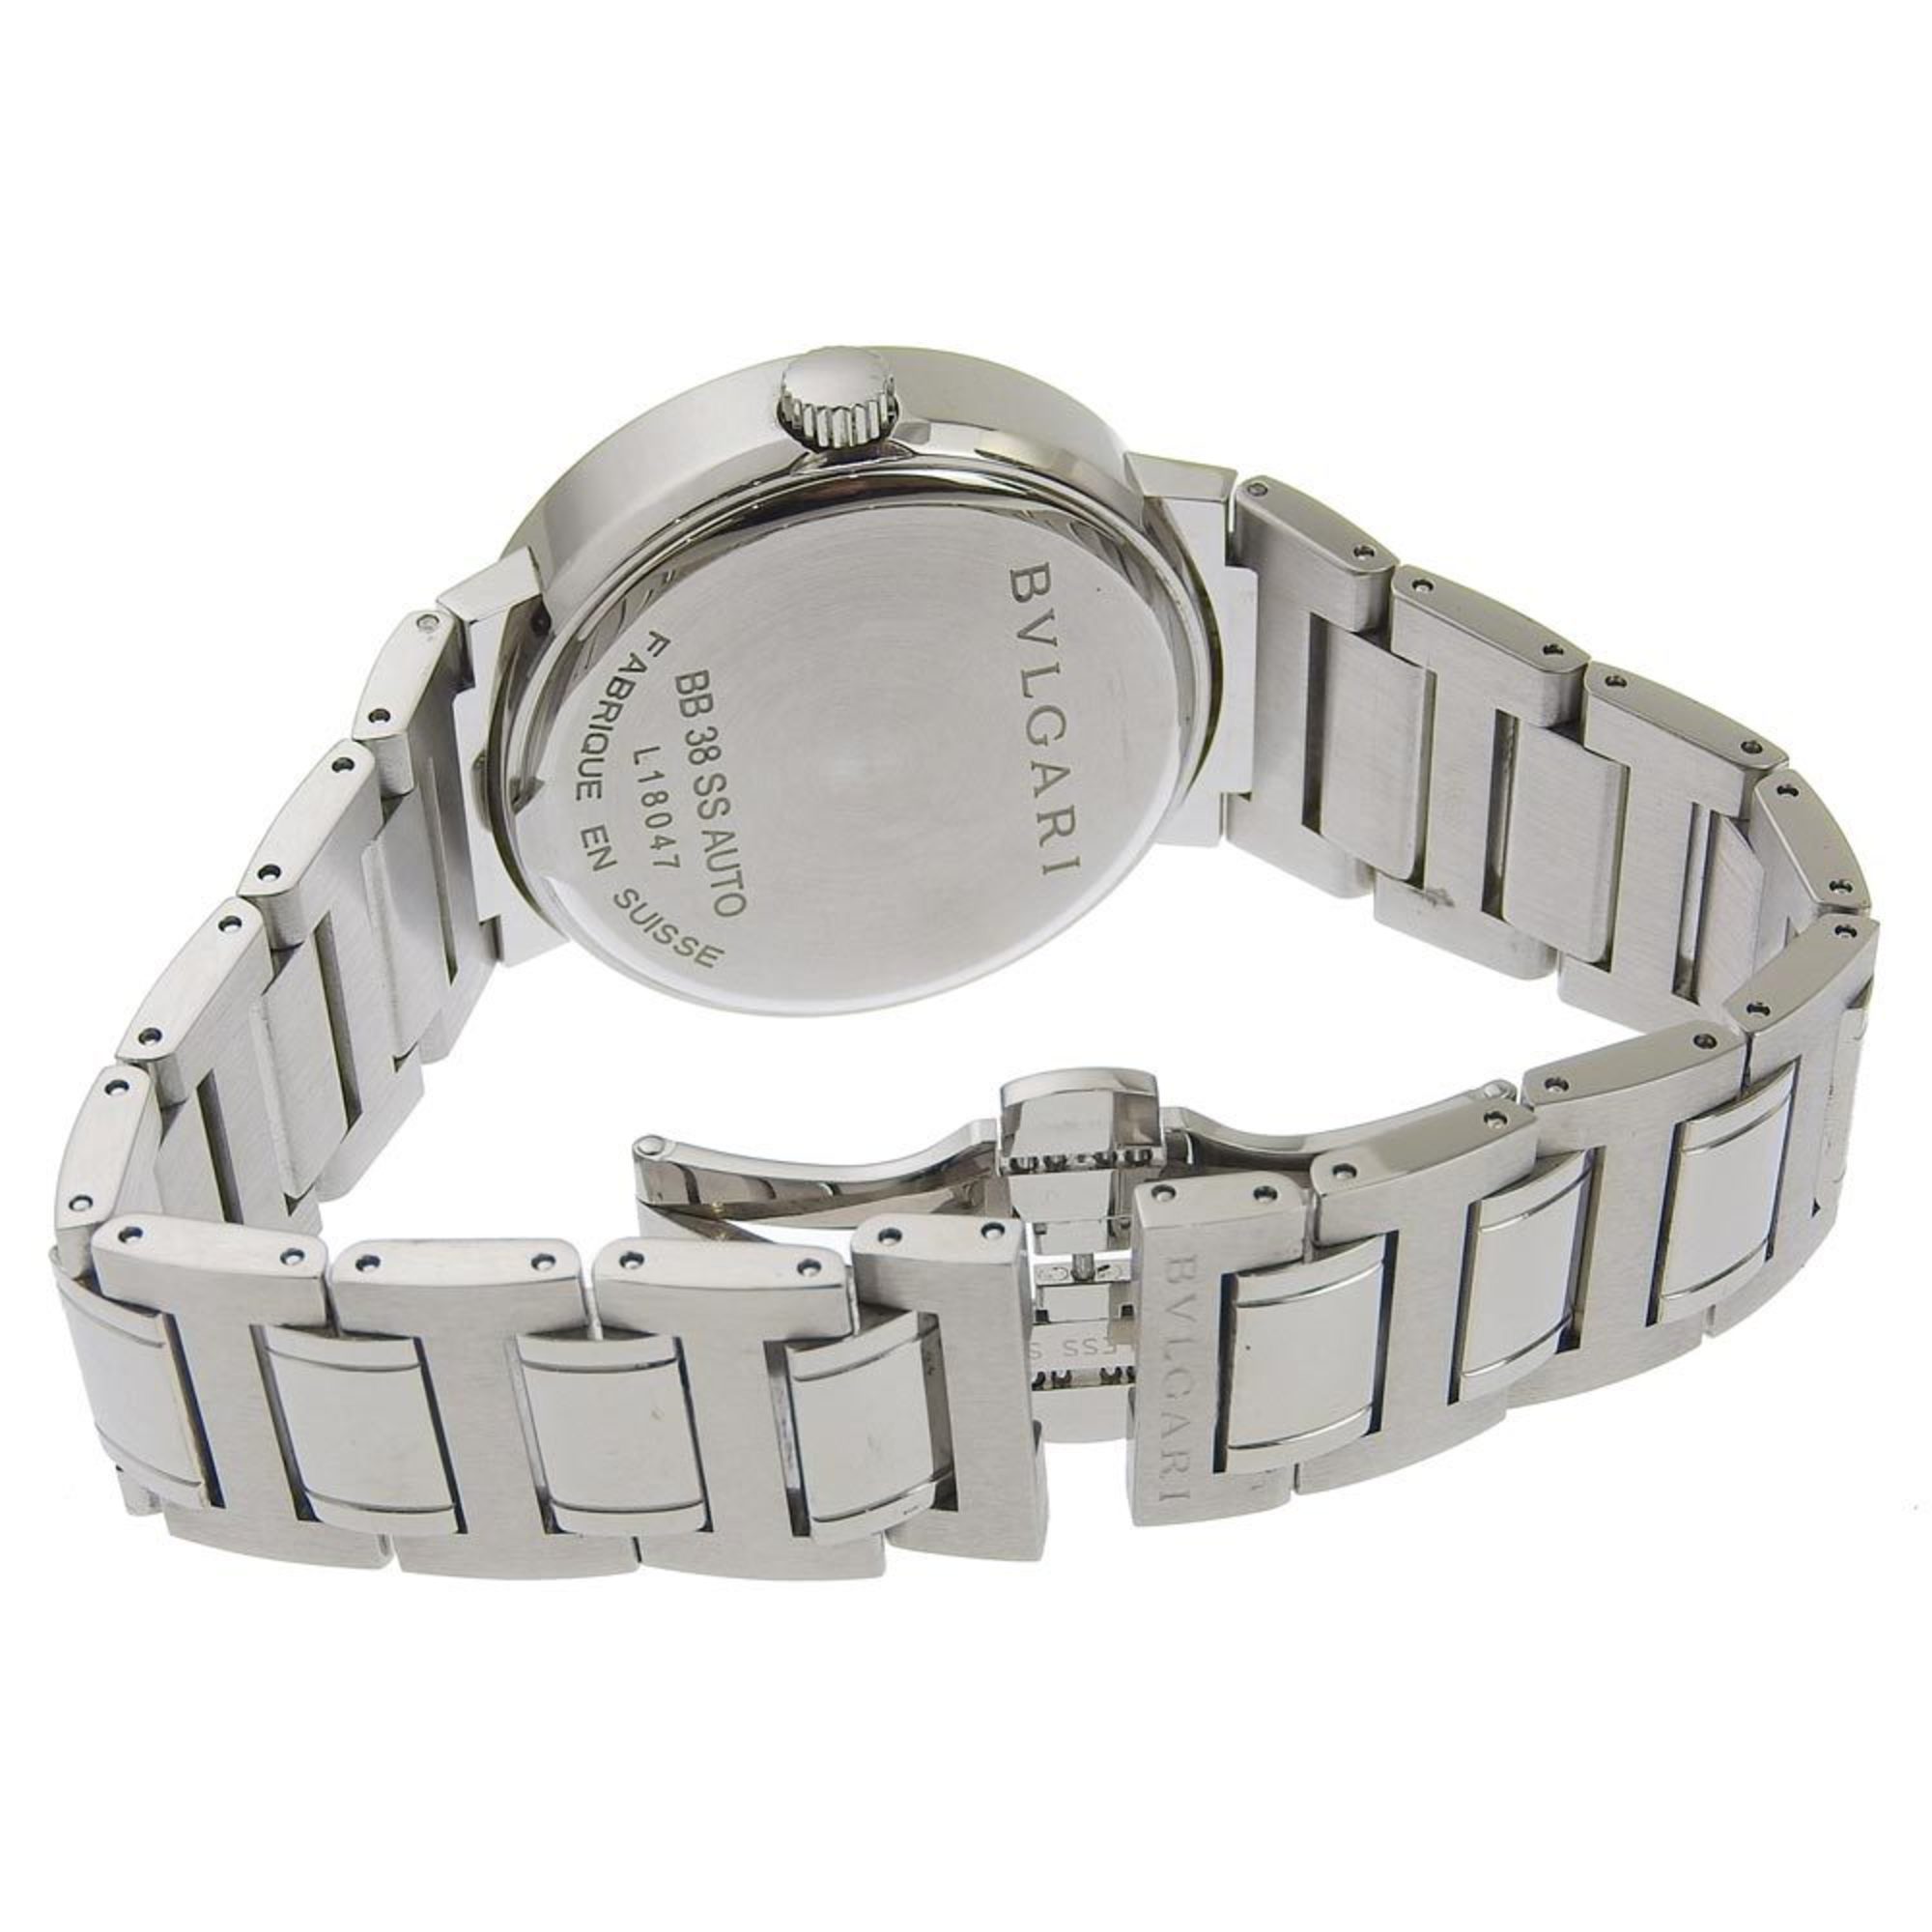 Bulgari BVLGARI Watch BB38SS AUTO Stainless Steel Swiss Made Silver Automatic White Dial Men's